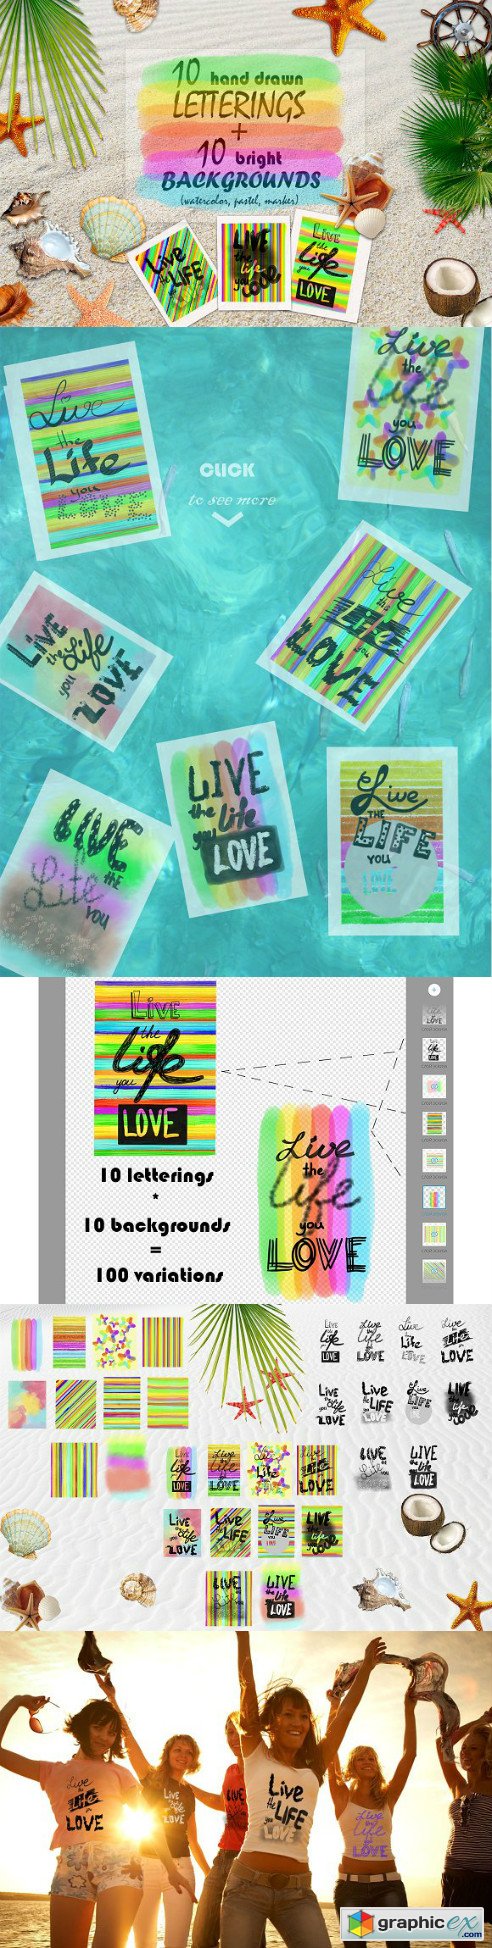 Lettering LIVE the LIFE you LOVE